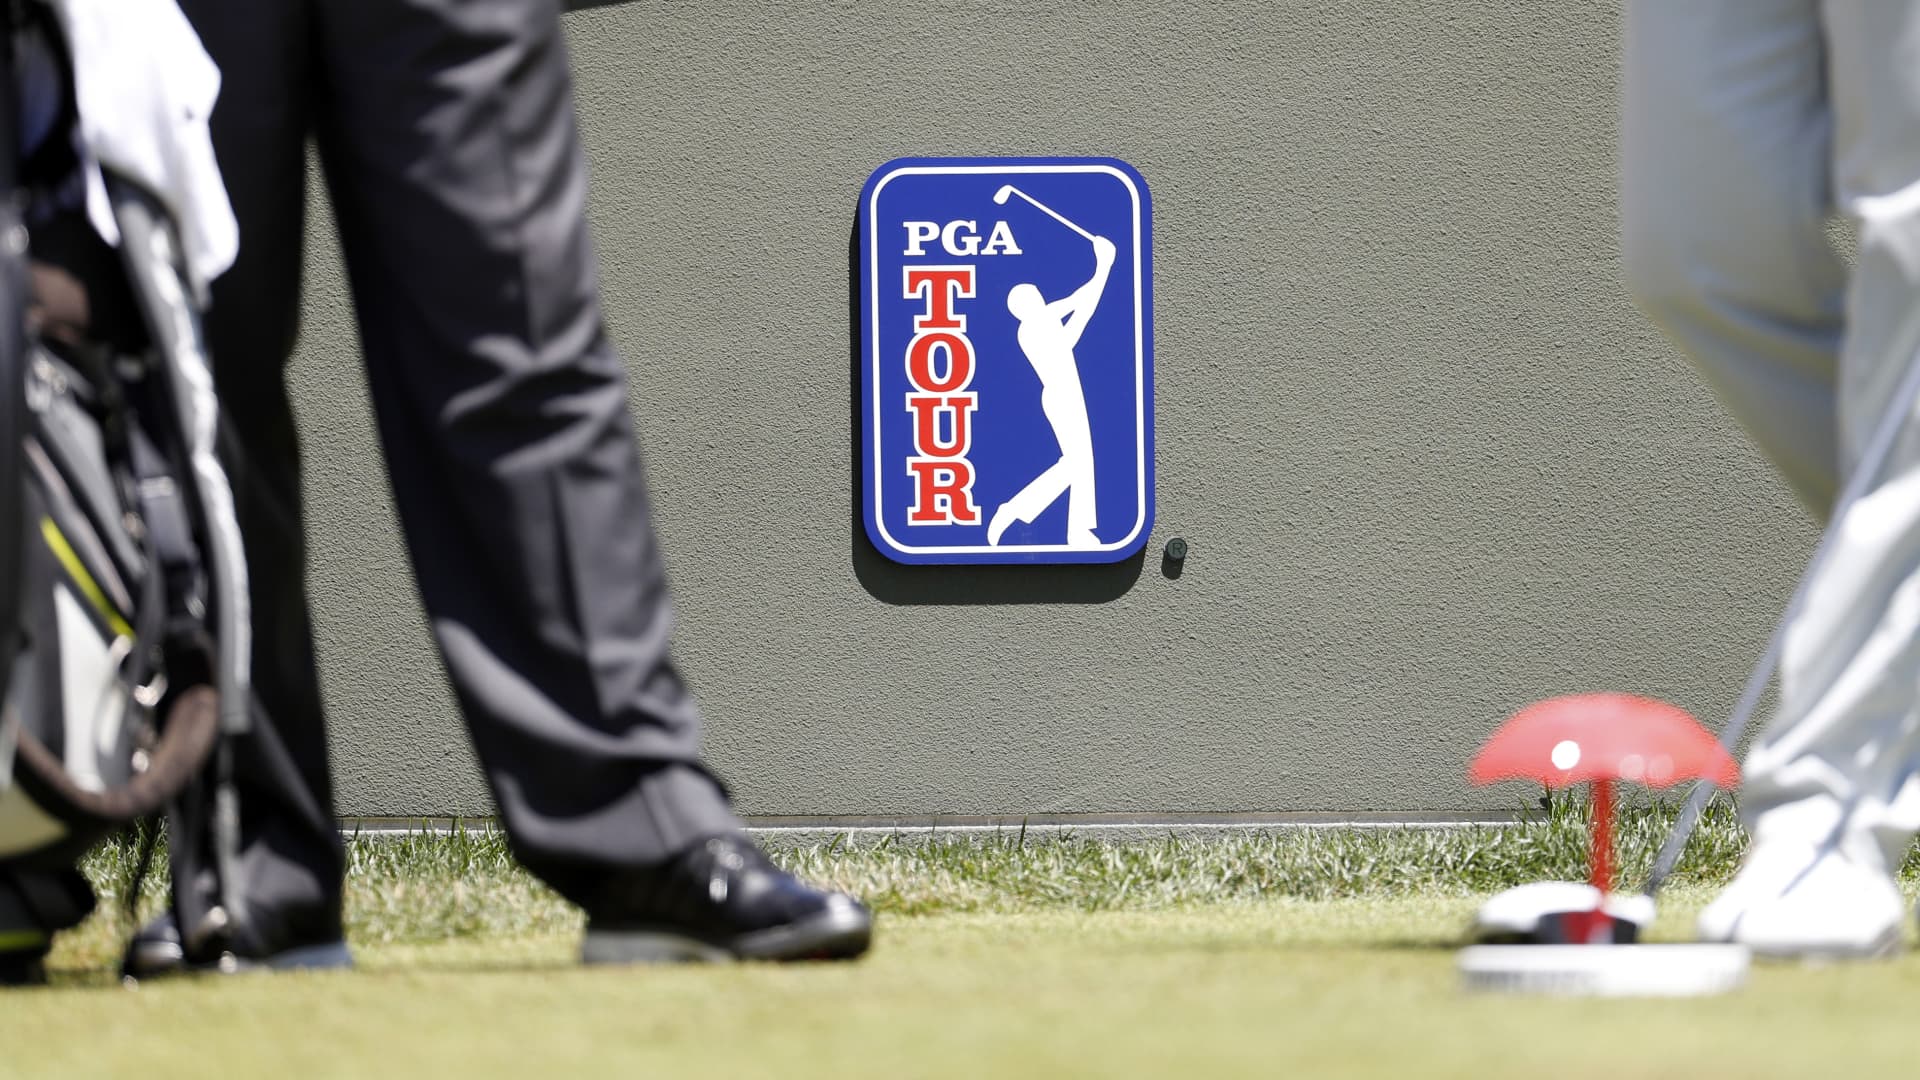 Justice Department investigating PGA Tour for possible antitrust violations tied to LIV Golf